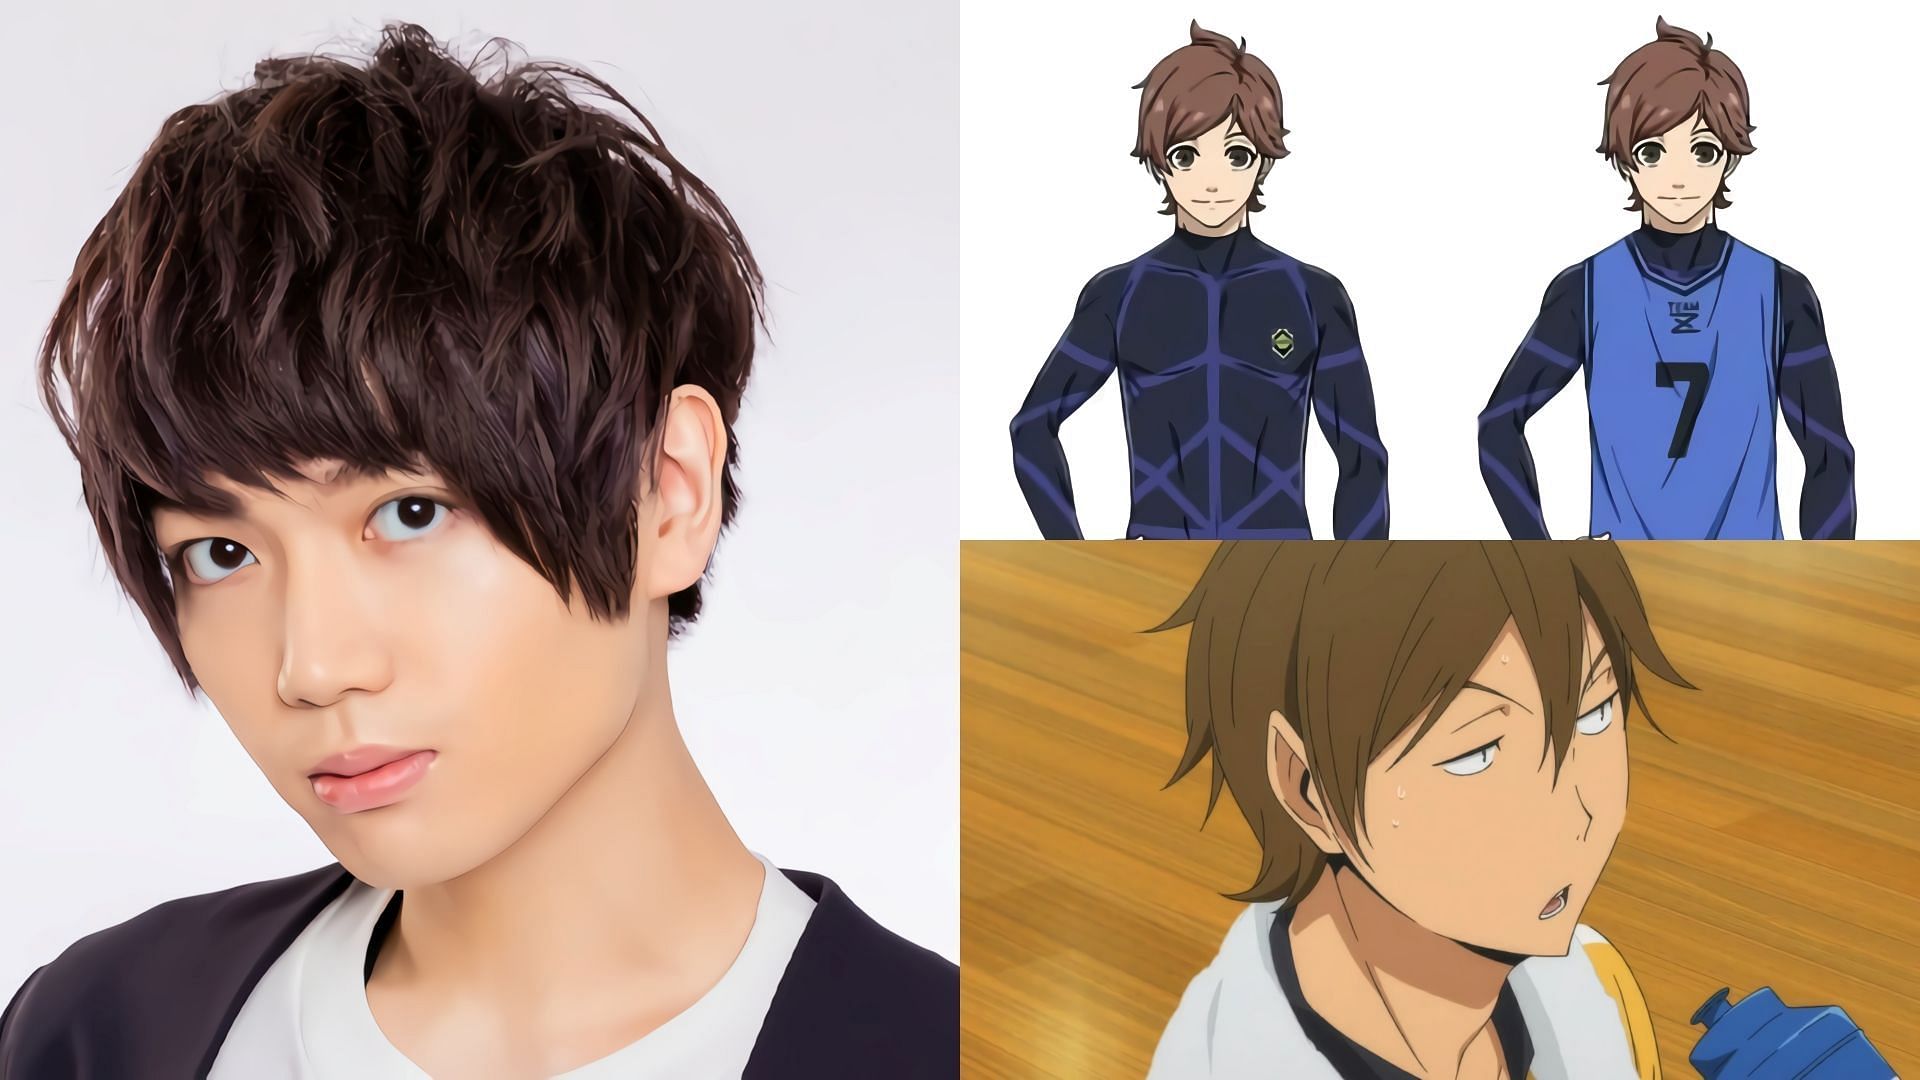 10 Pairs Of Blue Lock And Haikyuu Characters Who Have The Same Voice Actors